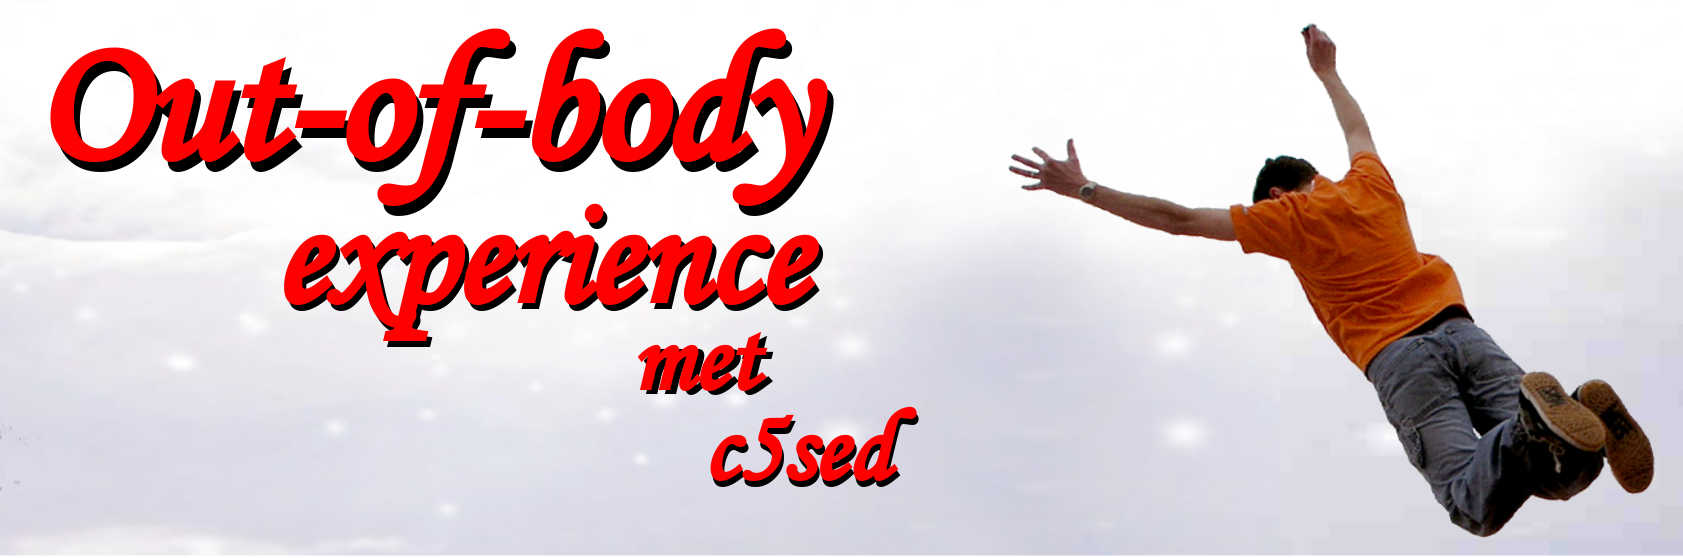 out-of-body experience met c5sed contact